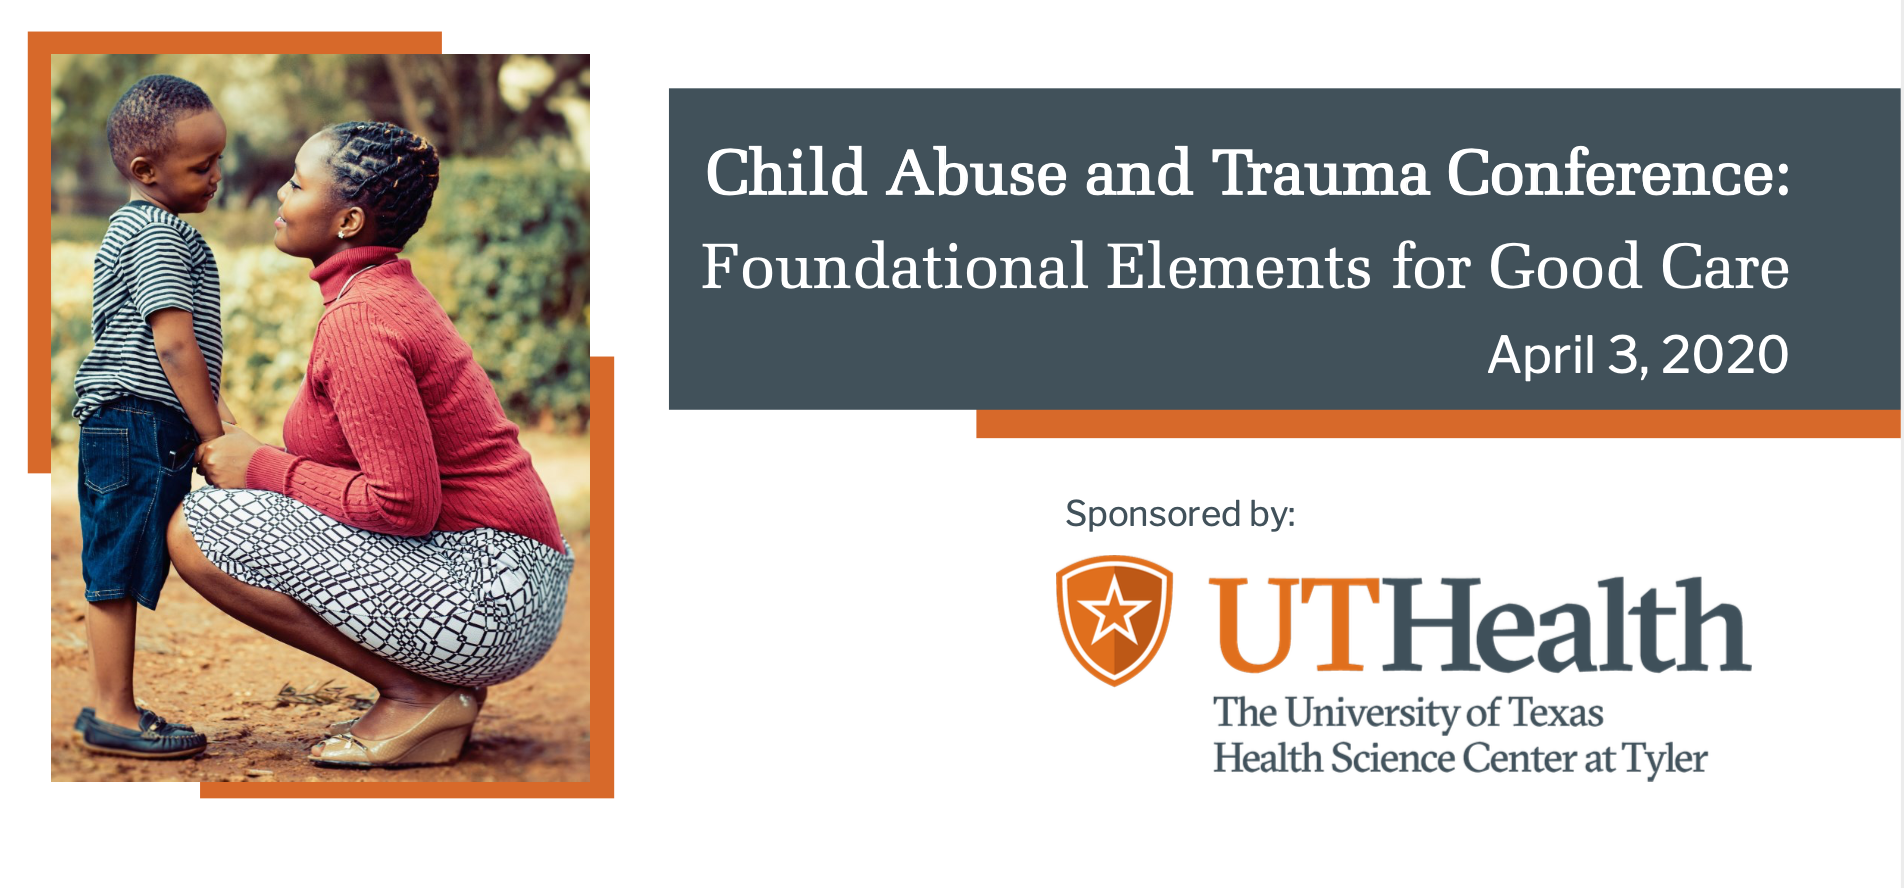 Child Abuse and Trauma Conference poster